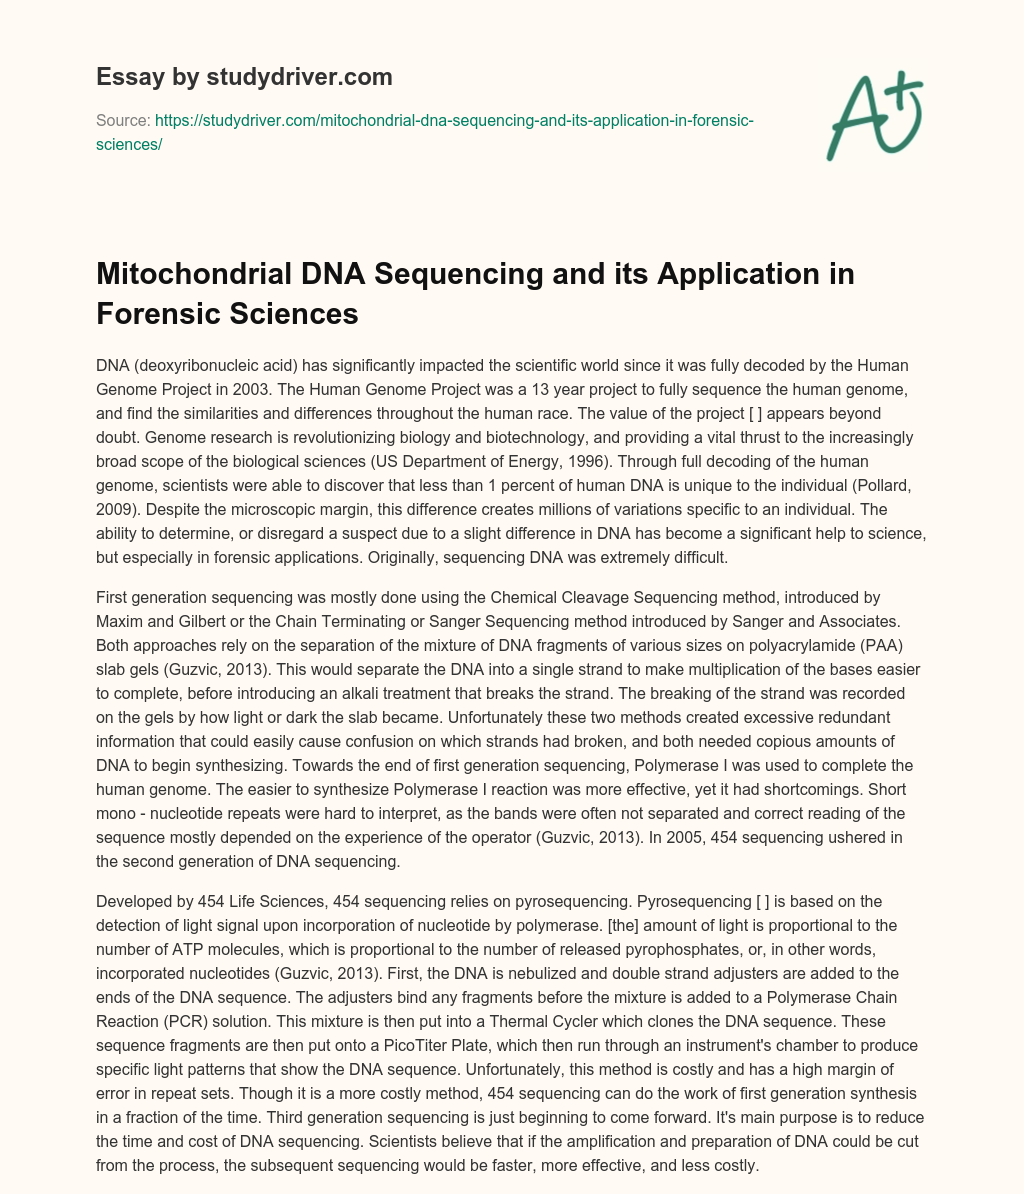 Mitochondrial DNA Sequencing and its Application in Forensic Sciences essay